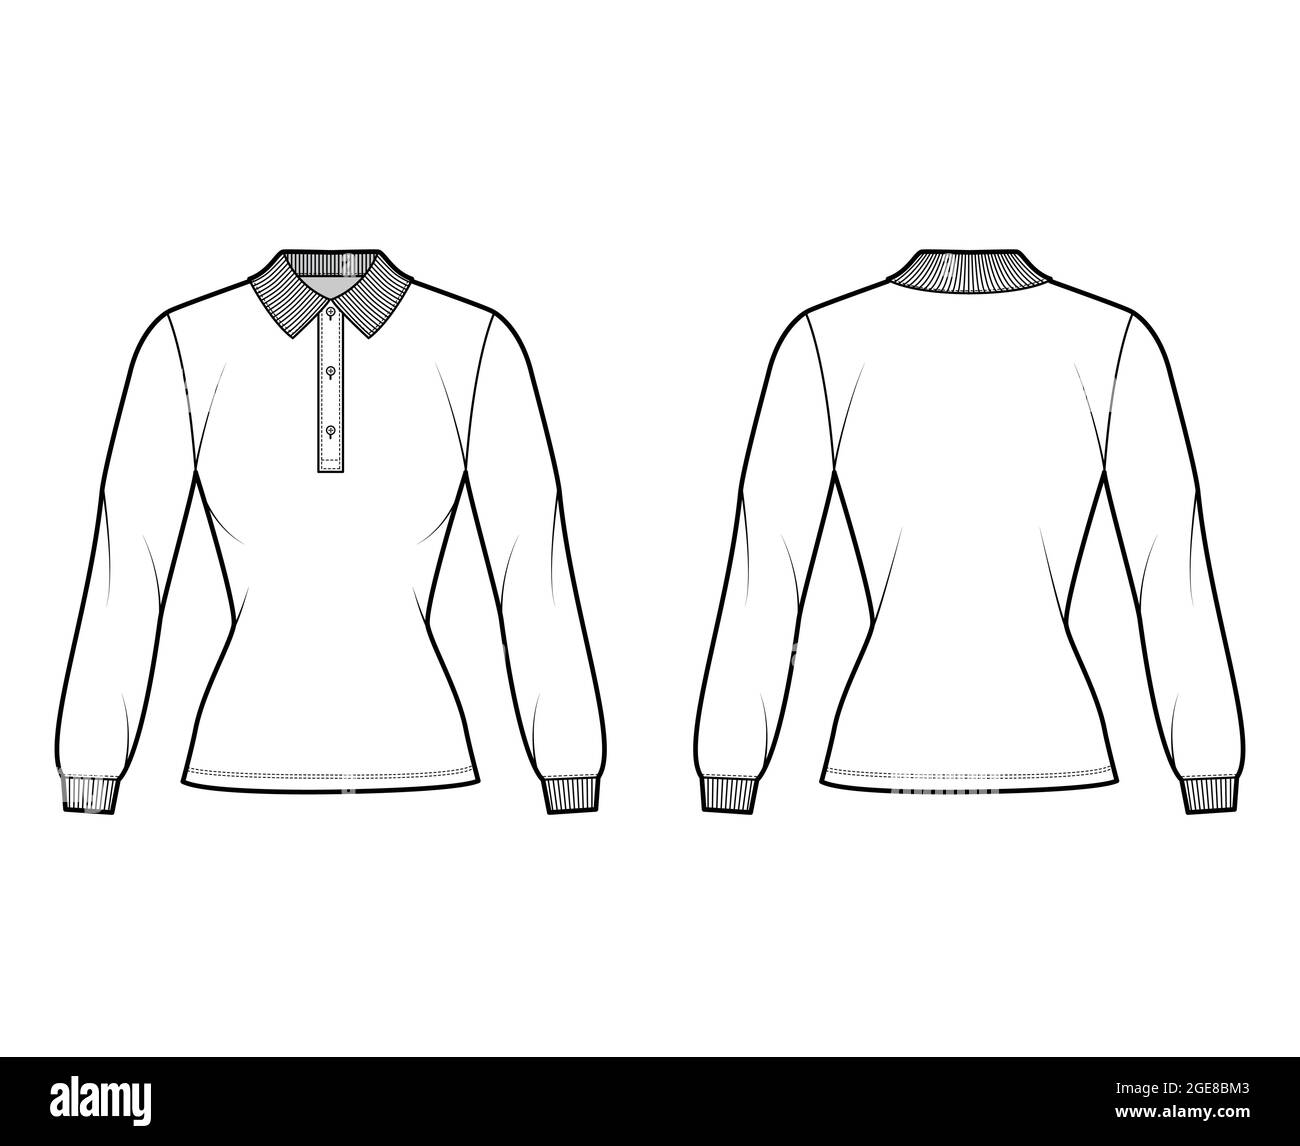 Shirt polo fitted technical fashion illustration with long sleeves, tunic length, henley button neck, flat knit collar. Apparel top outwear template front, back white color style. Women men unisex CAD Stock Vector